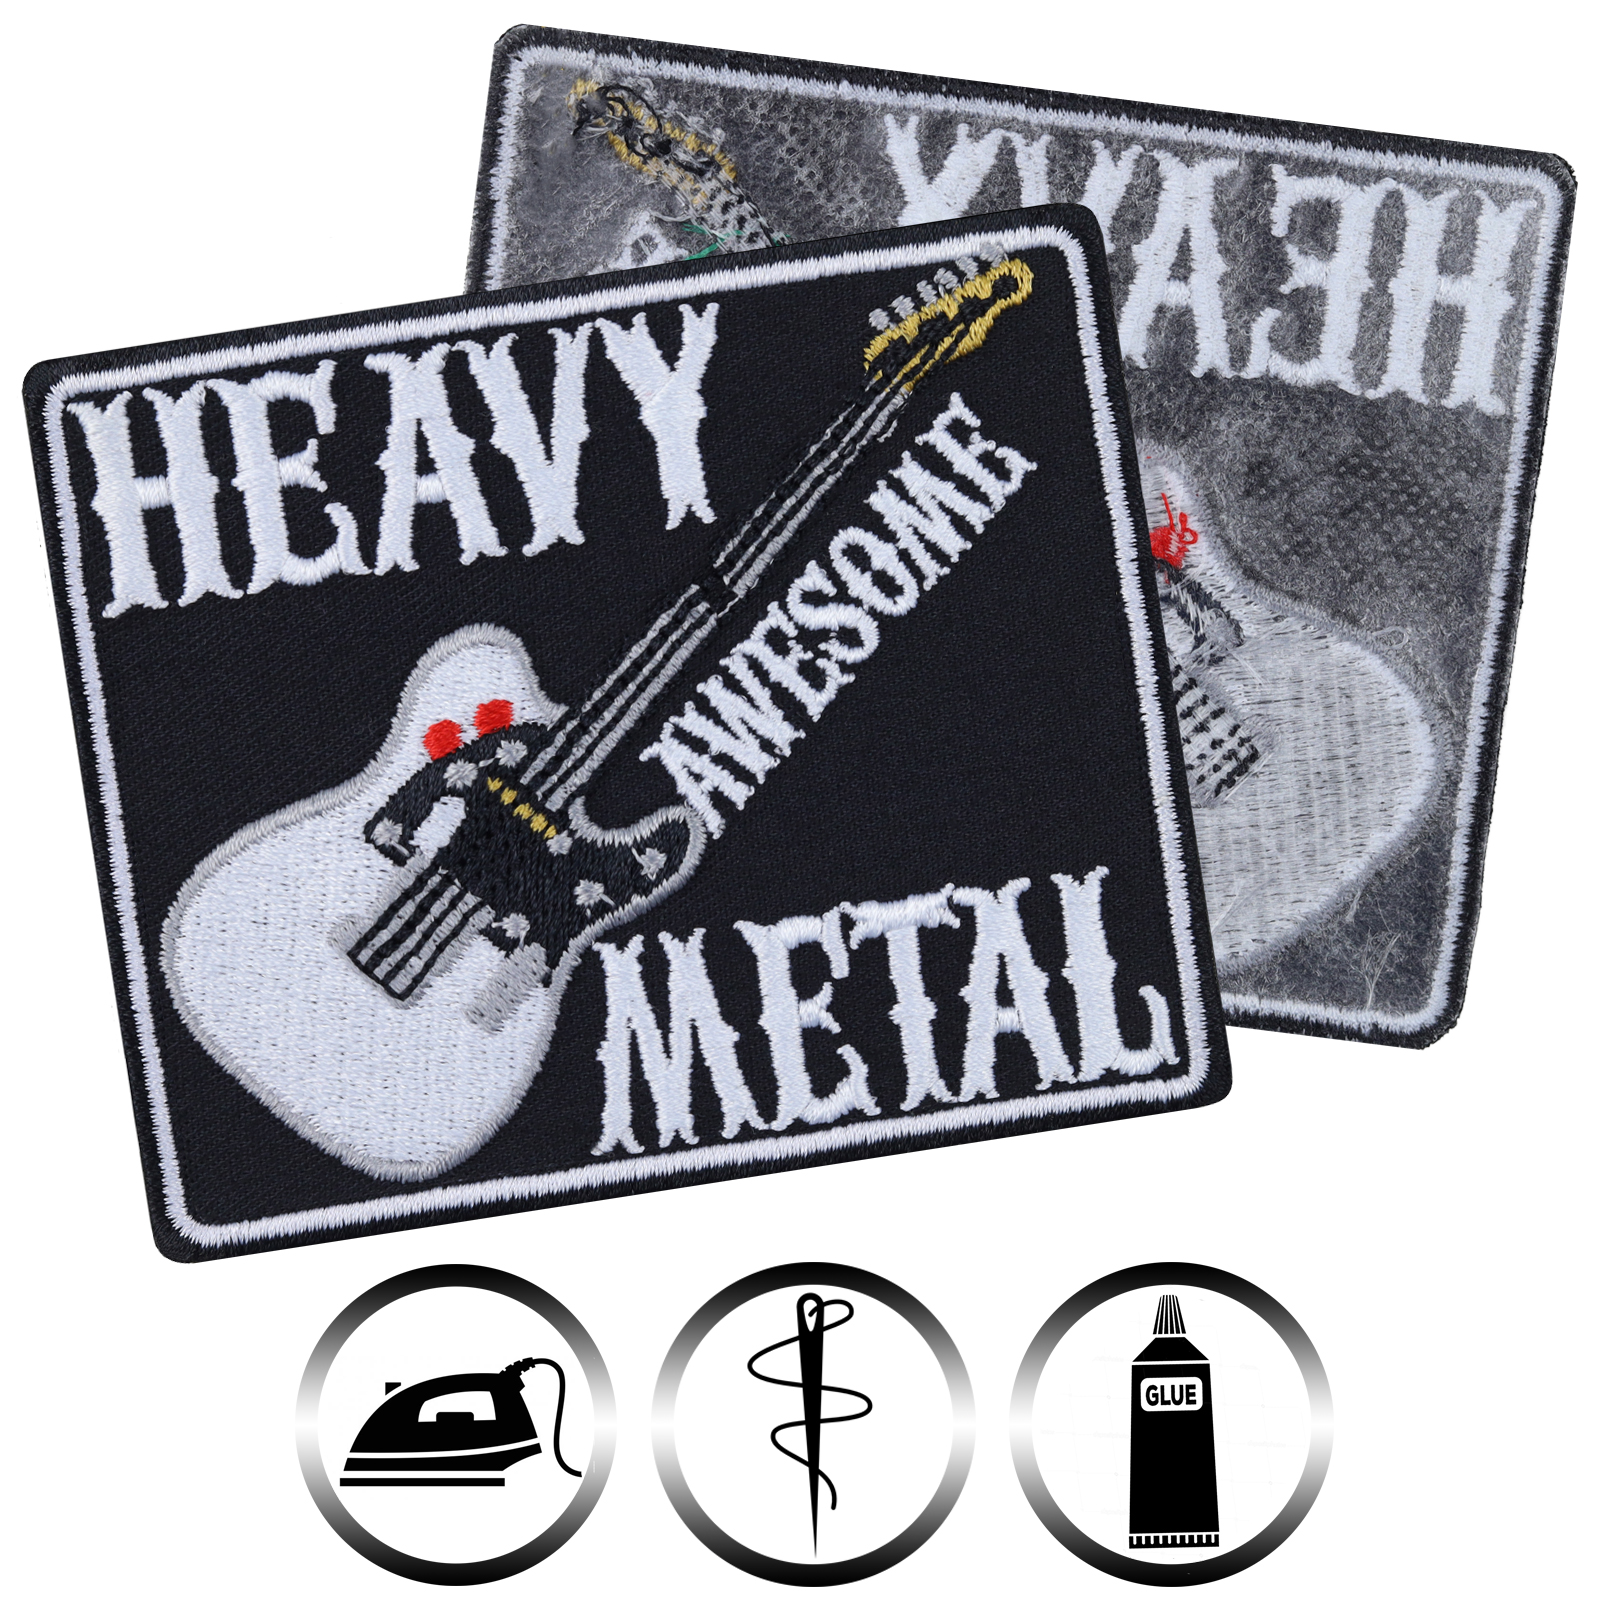 Heavy Metal awesome - Patch